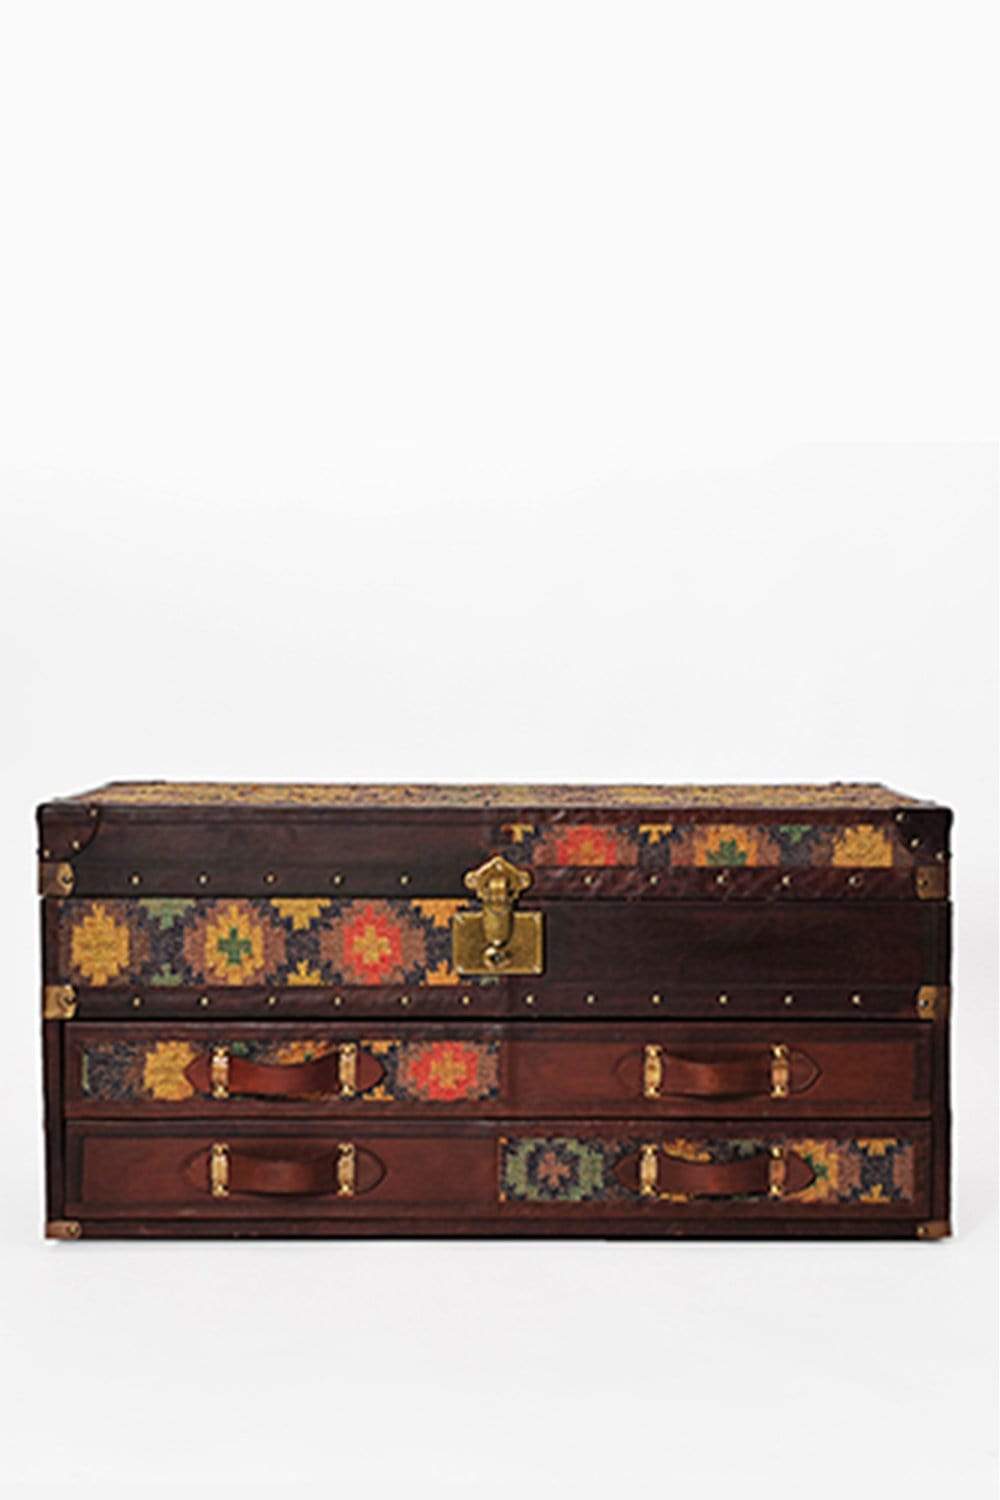 SPRINGFIELD CHEST OF DRAWERS CUM TRUNK - KILIM AND LEATHER - ART AVENUE